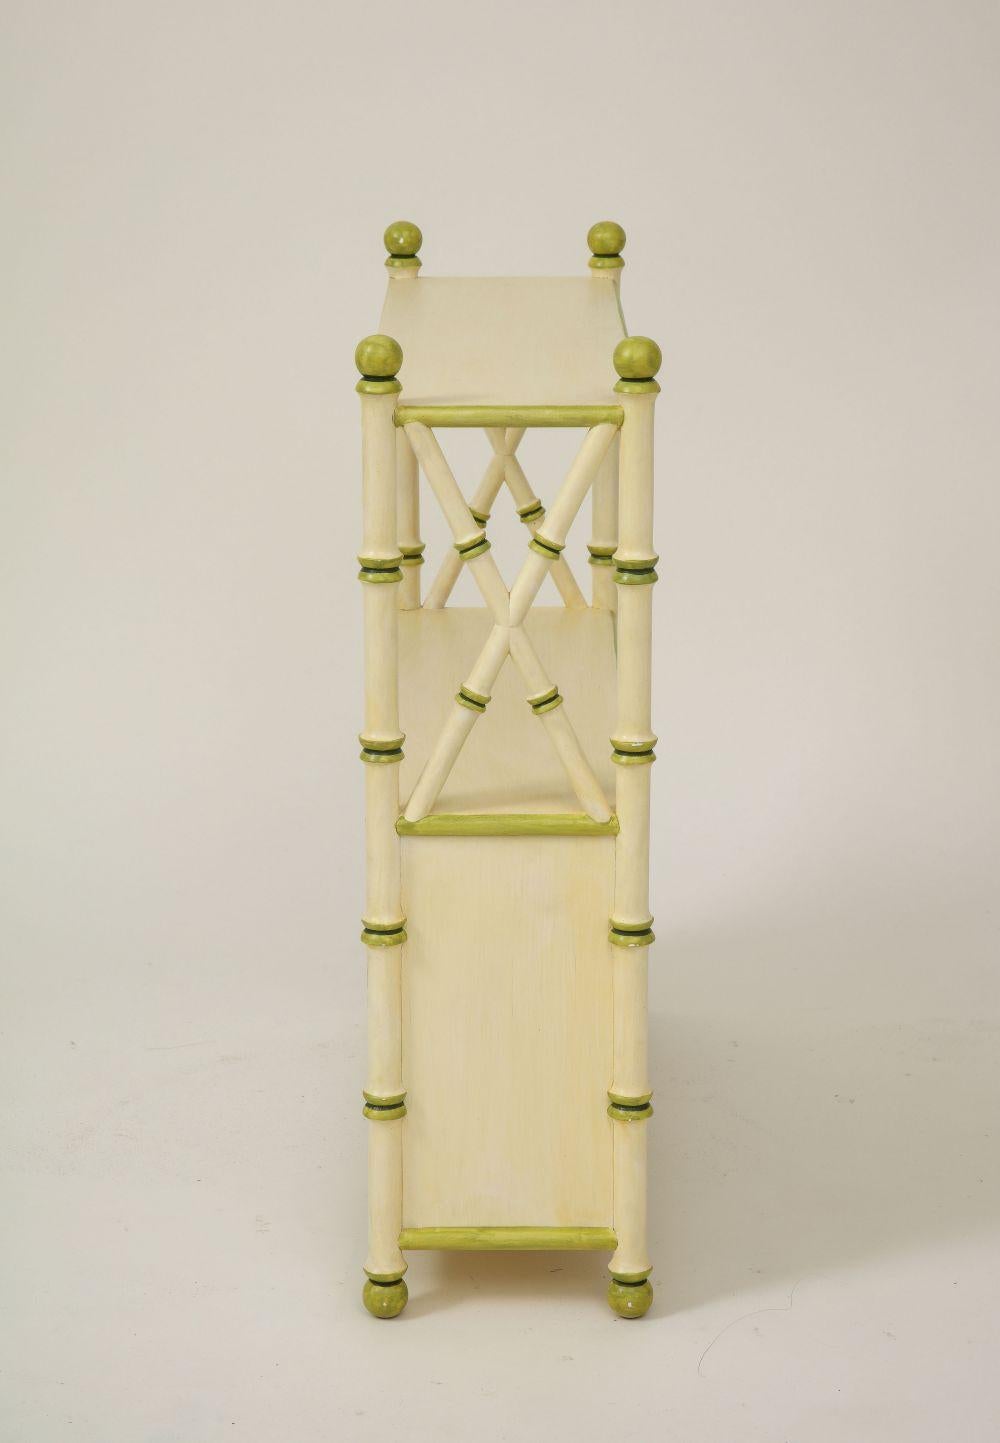 Wood Colefax & Fowler - Green Painted Hanging Shelf For Sale